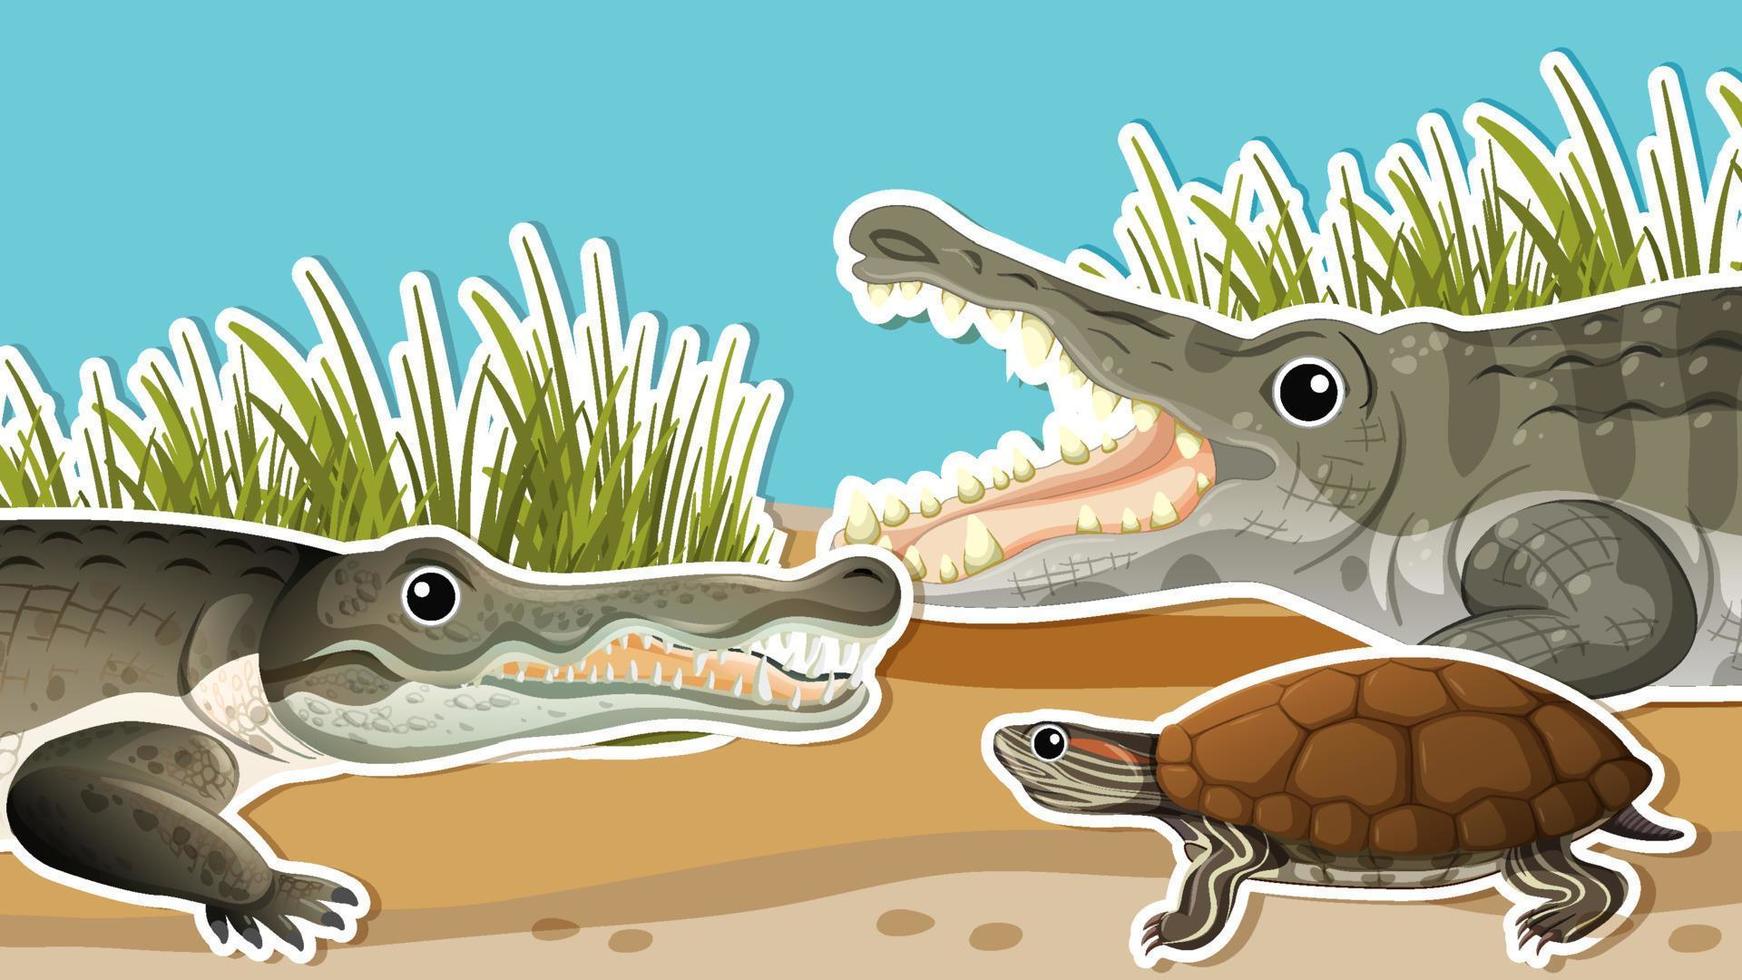 Thumbnail design with crocodile and turtle vector